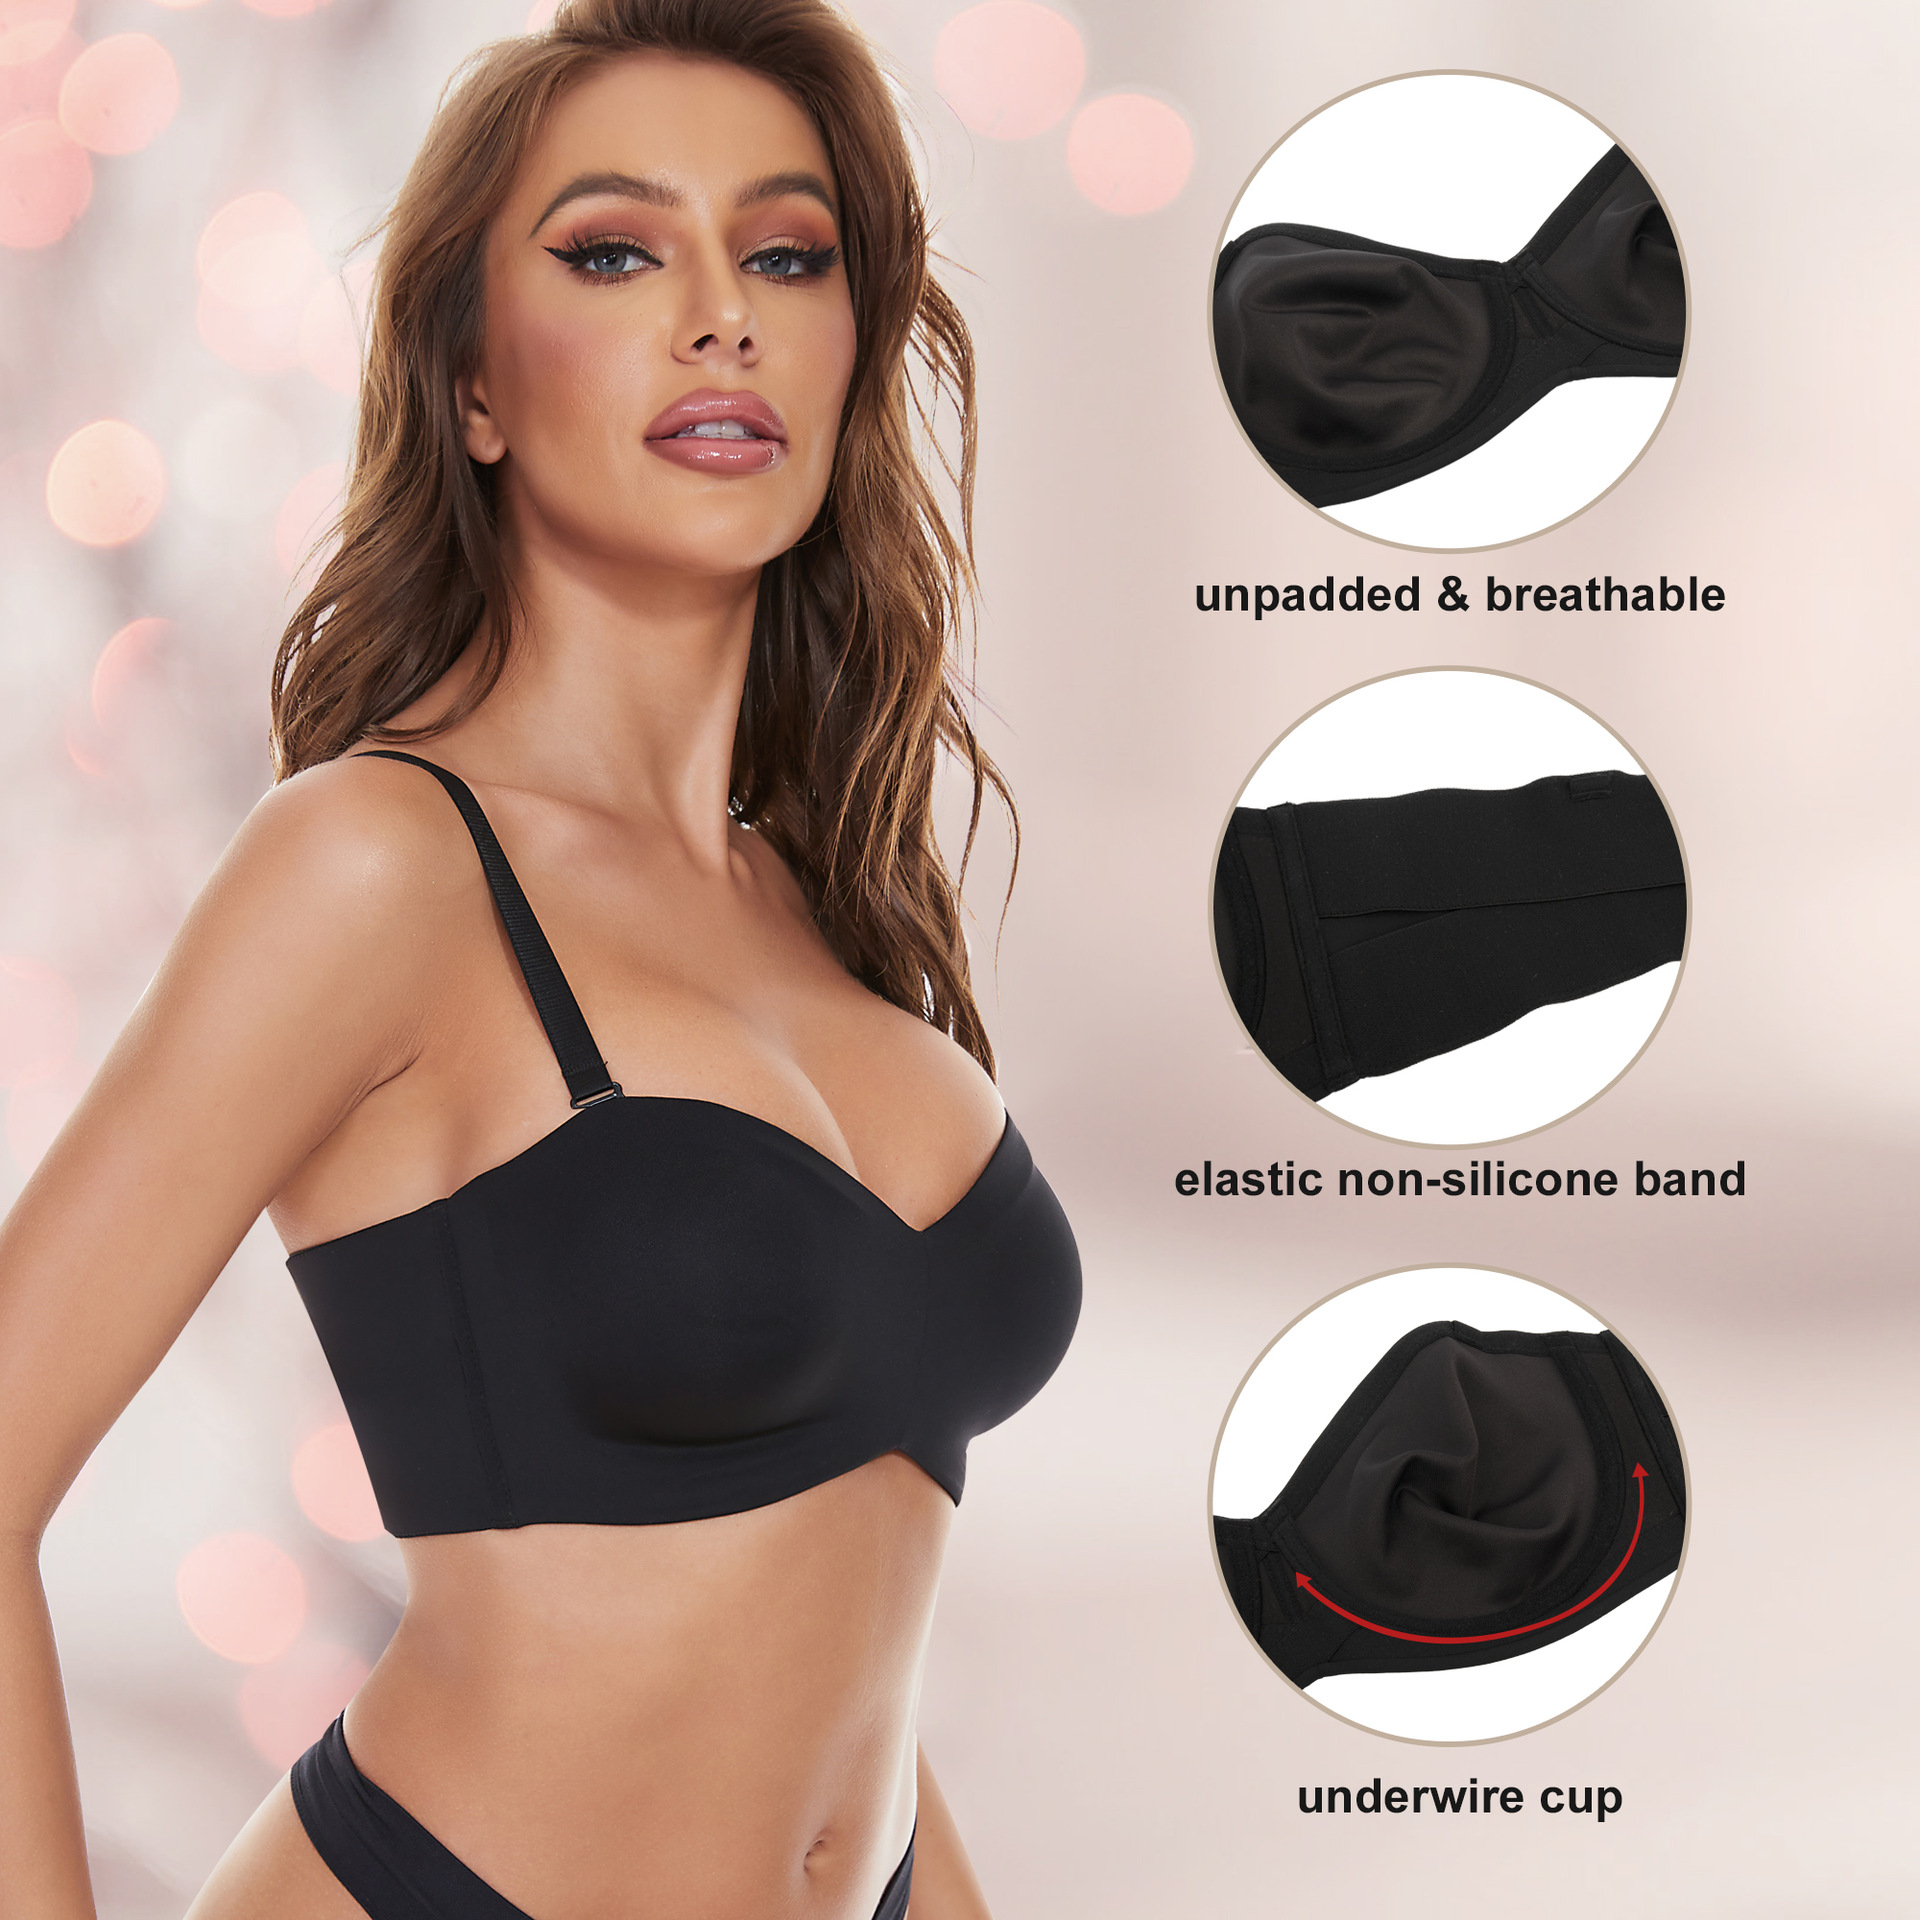 Cavotor Strapless Bra Padded Bandeau Bra Stay Up Non-Slip Silicone